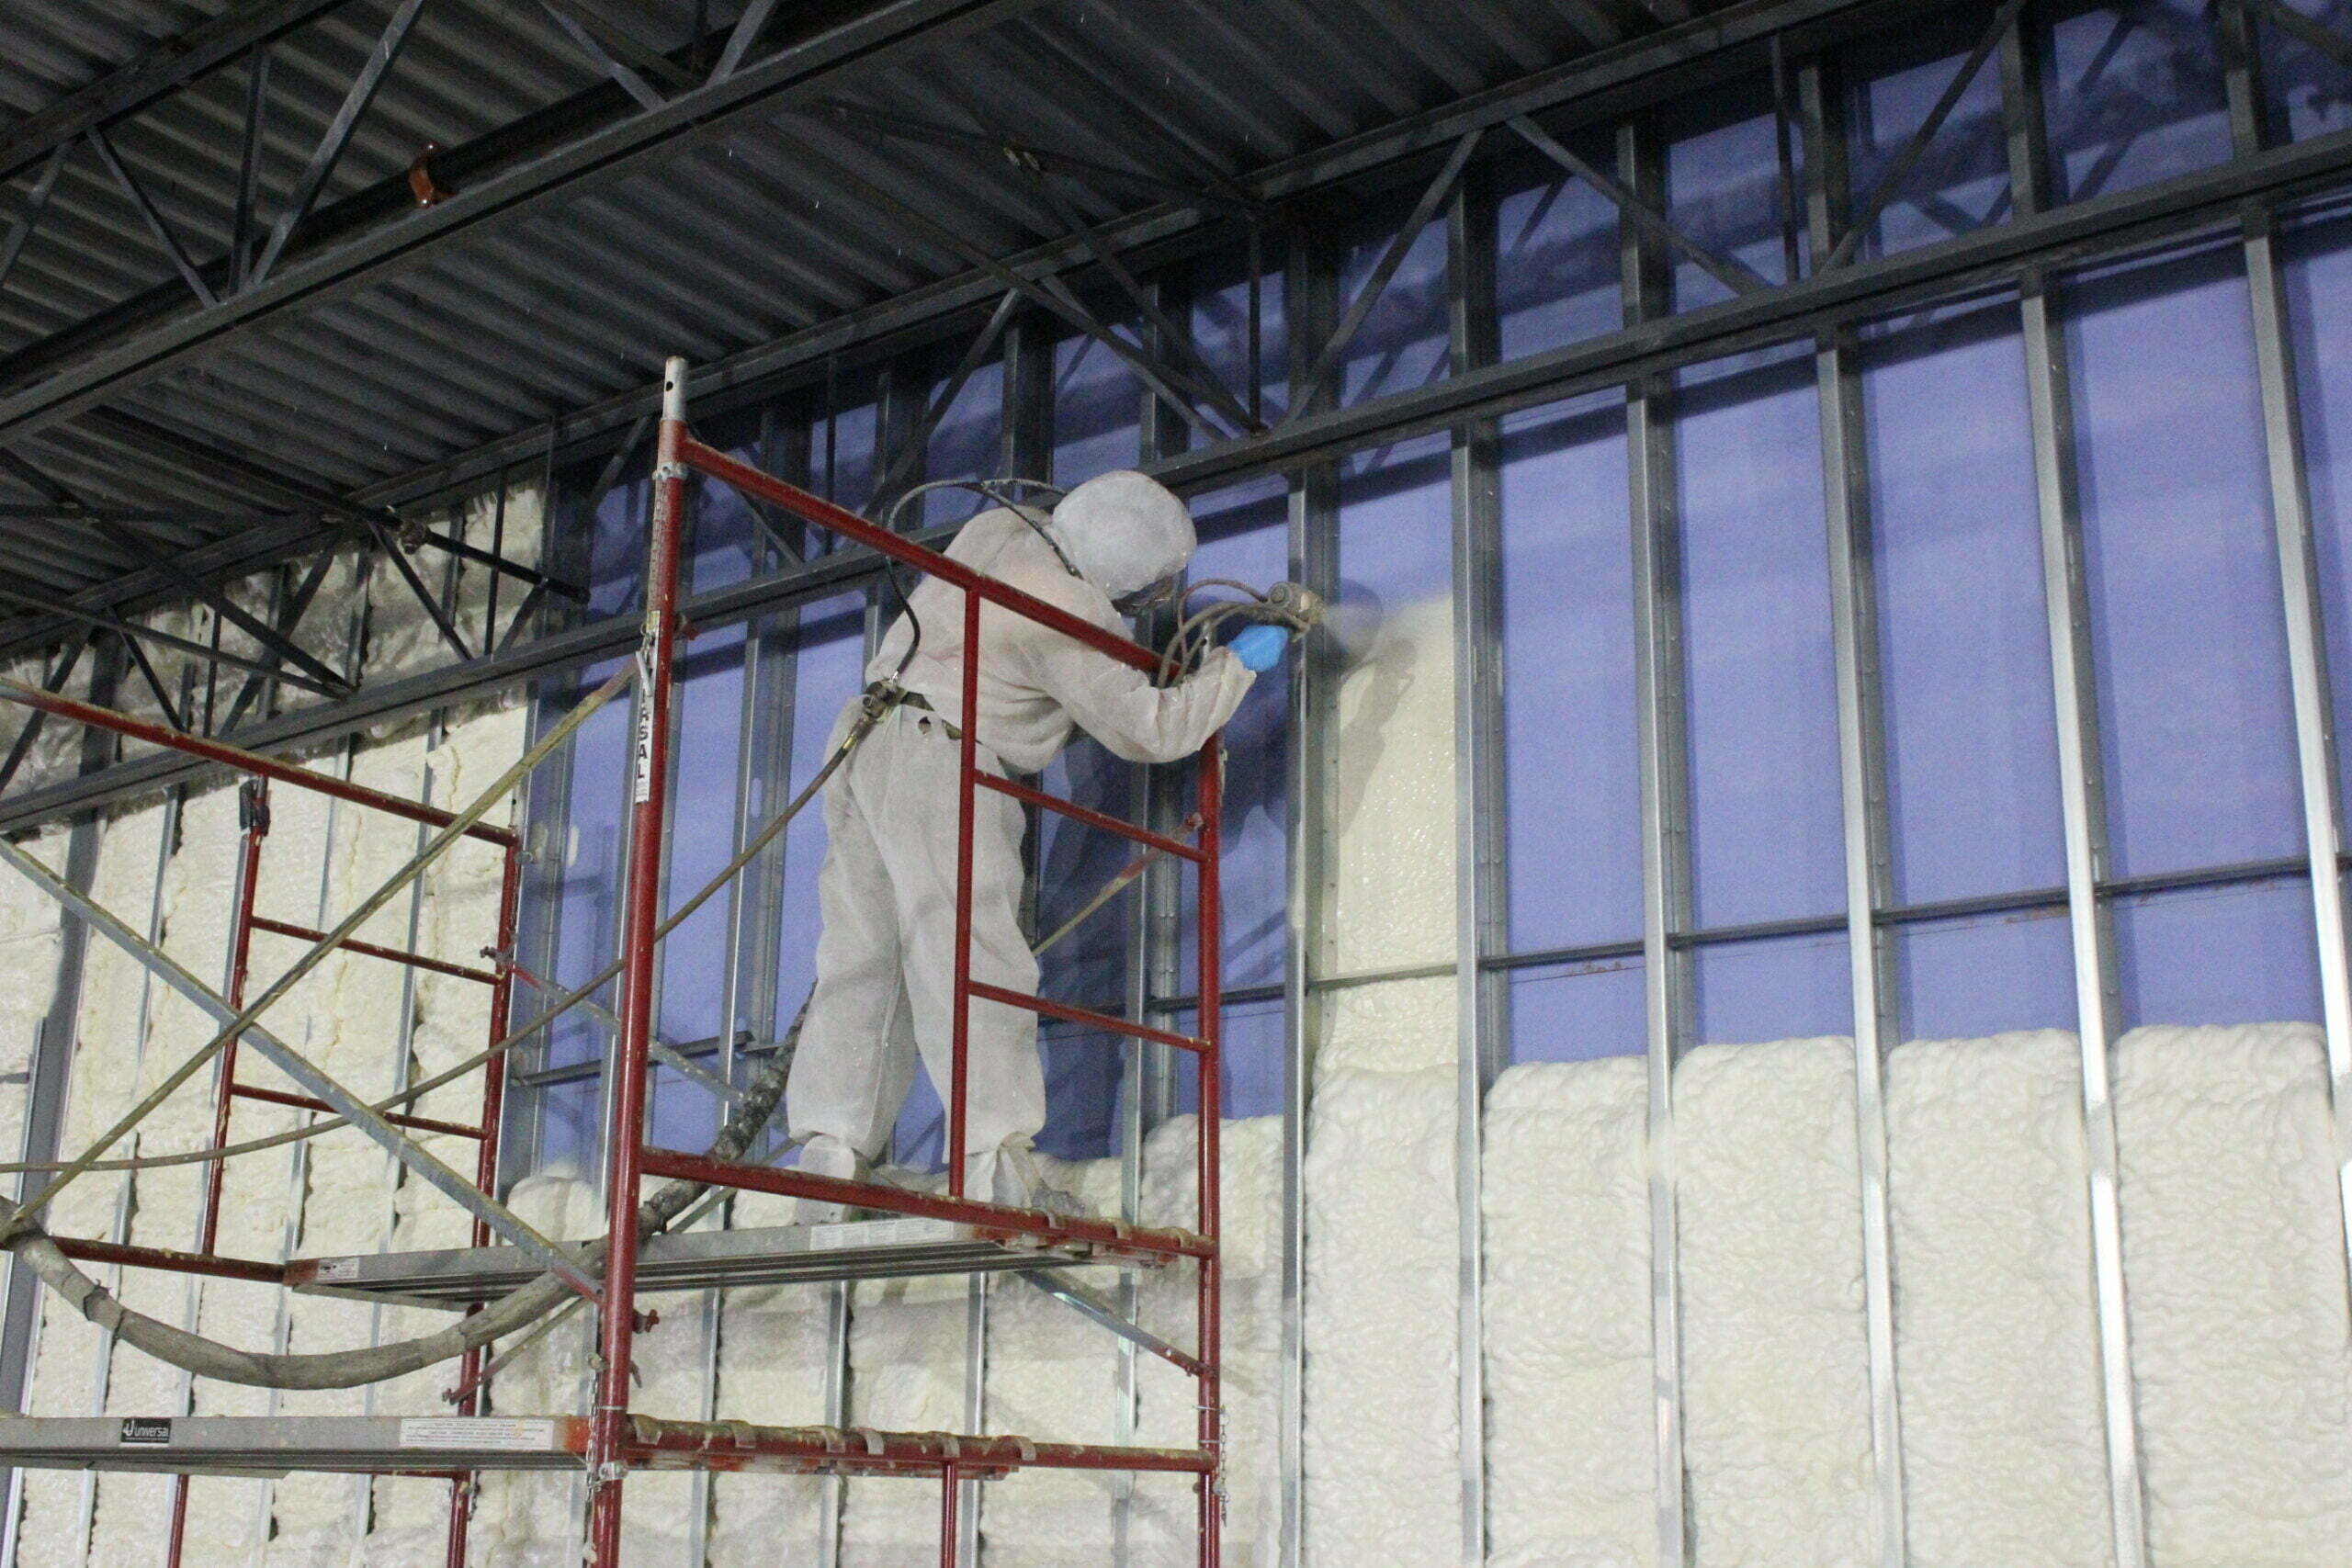 Commercial spray foam scaled